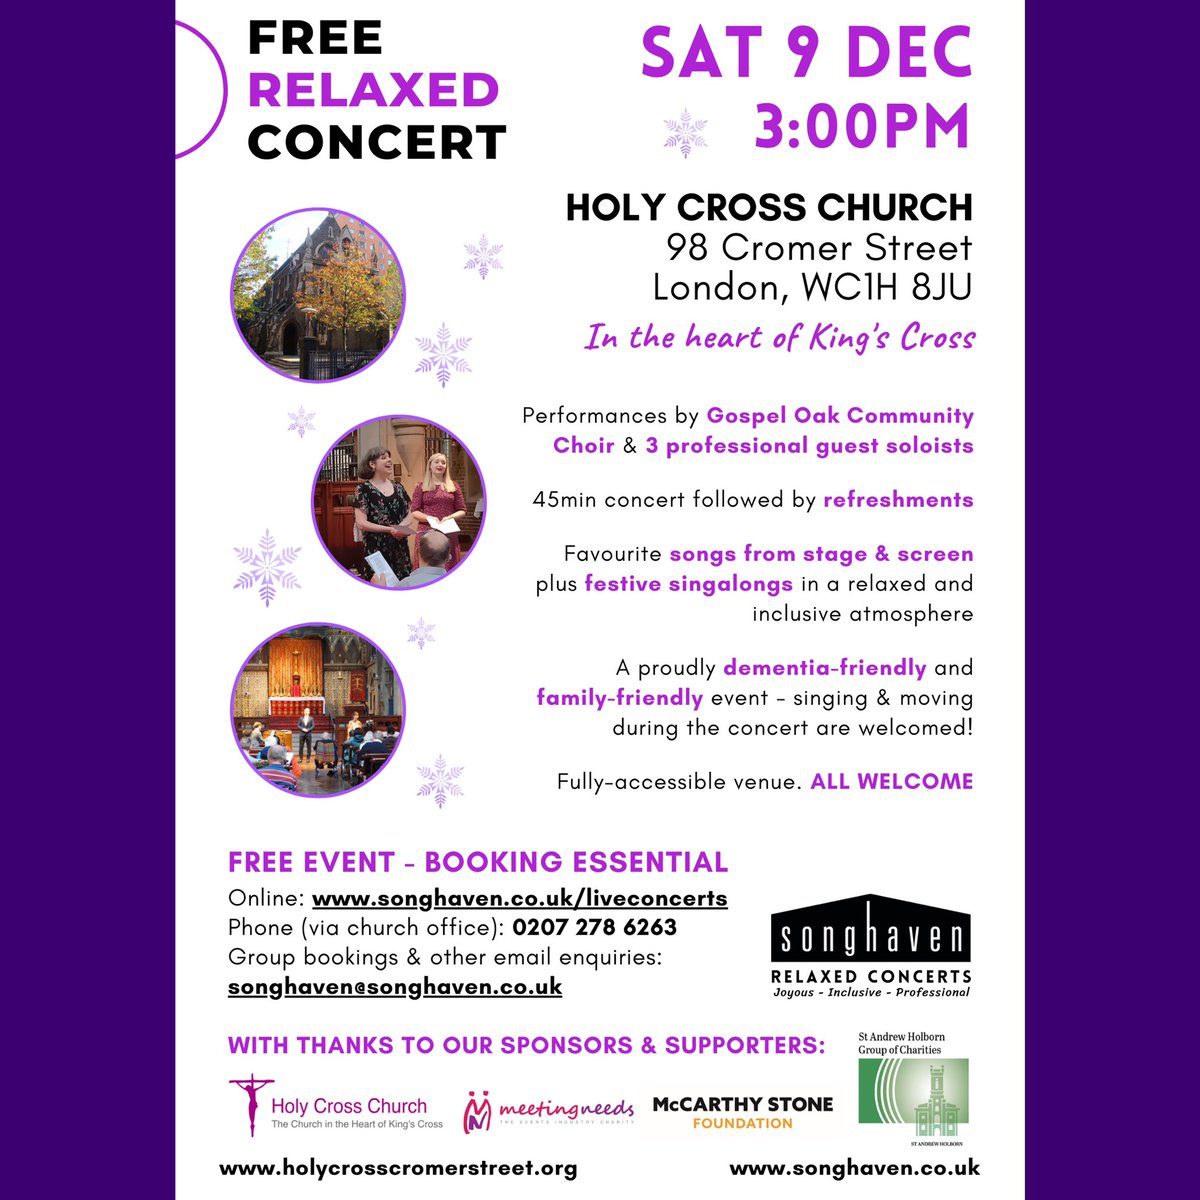 This Sat 9 Dec we kick off our 1st of 3 Festive #relaxedconcerts. Enjoy seasonal singalongs, guest performances & a social tea in an inclusive #dementiafriendly atmosphere! Booking is essential via: ticketsource.co.uk/songhaven as our Festive concerts are very popular & will book out!